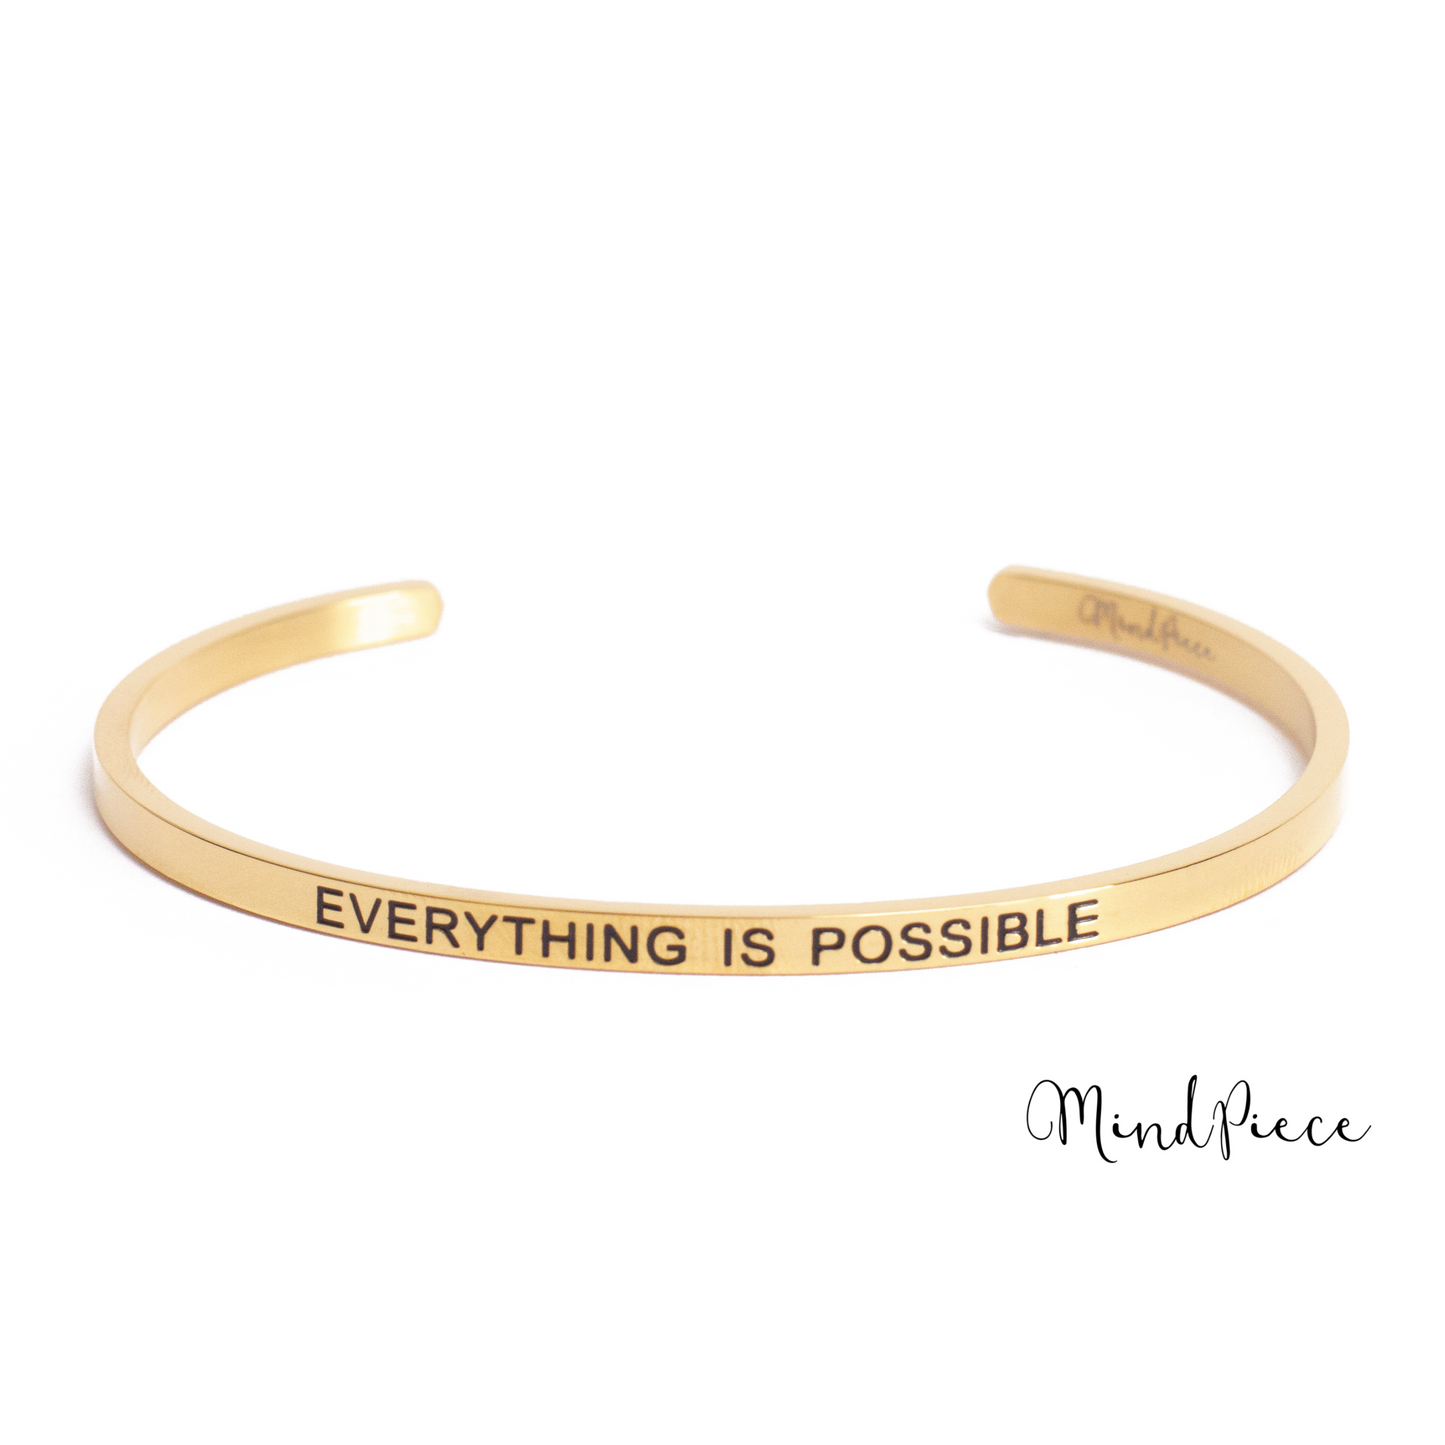 Quote Bracelet - Everything is possible